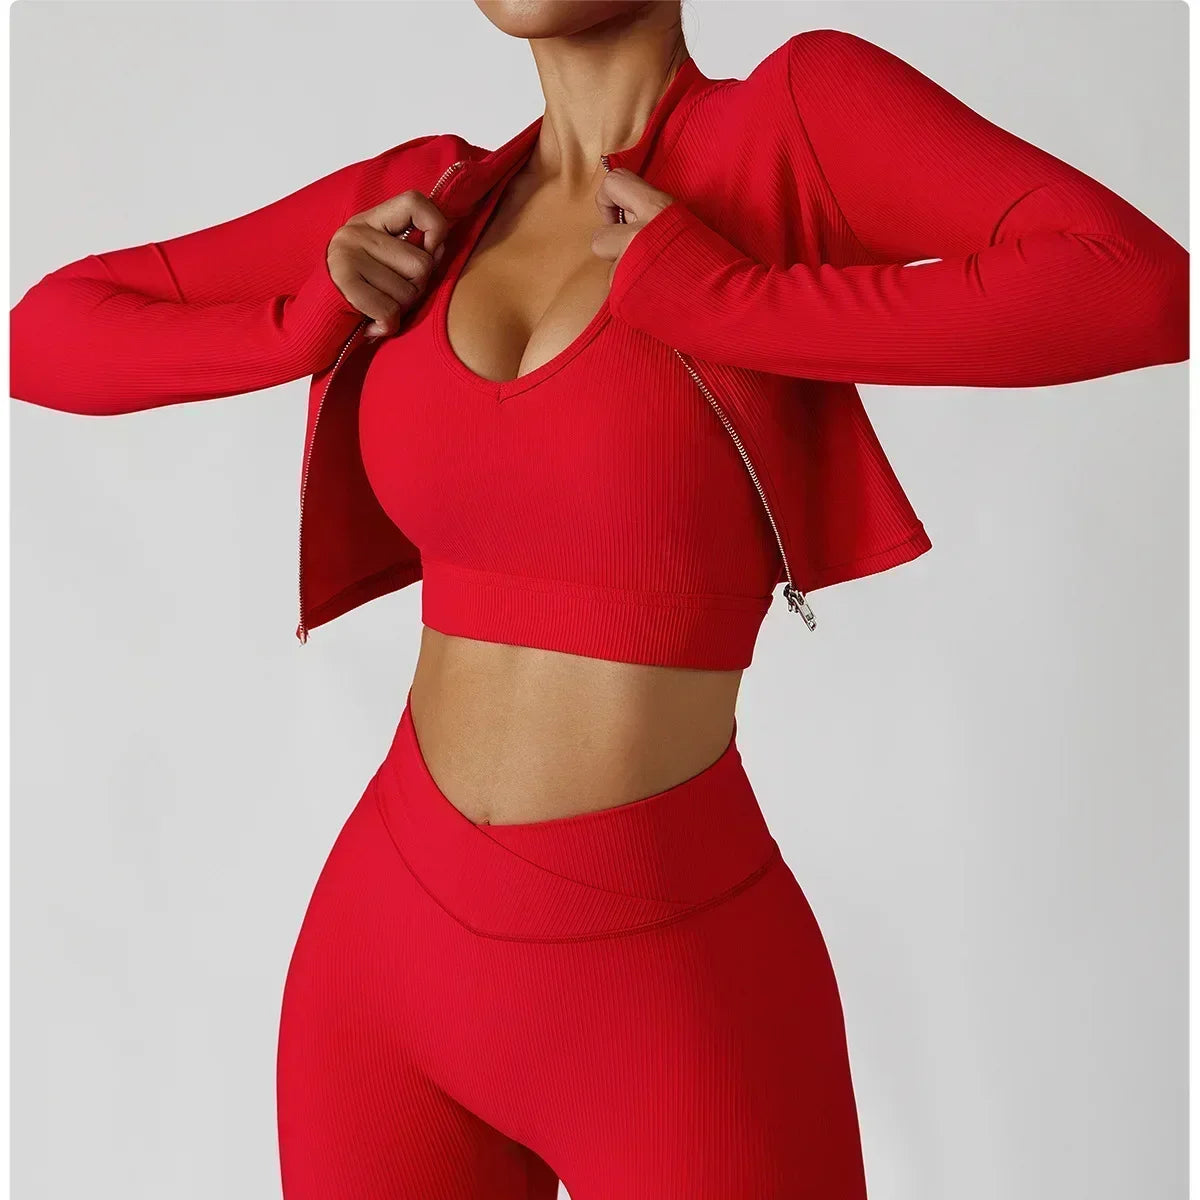 red yoga clothes